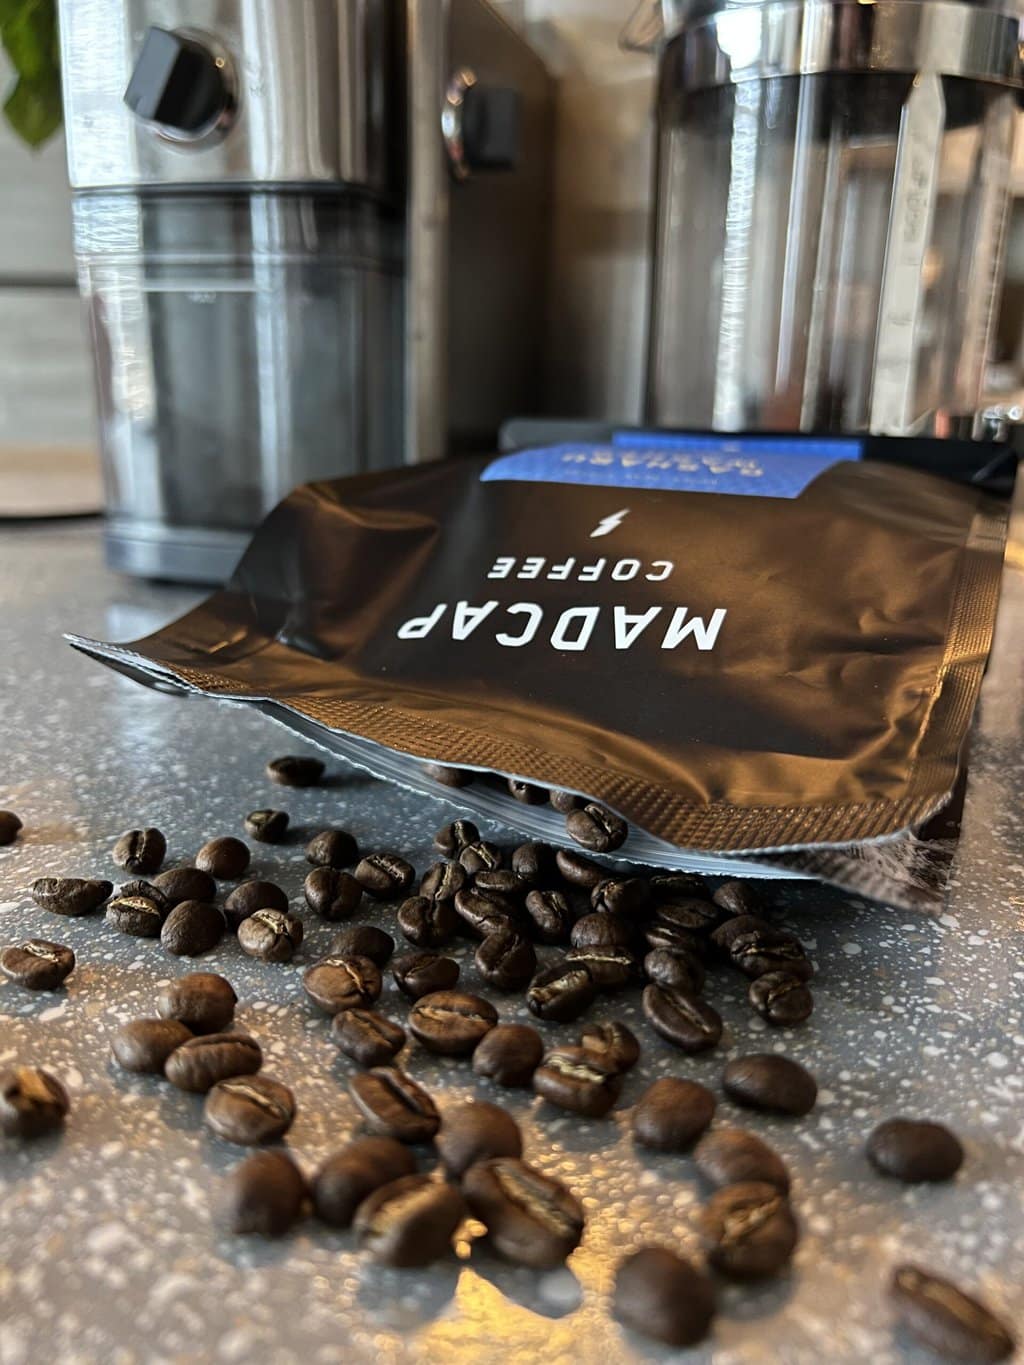 Madcap coffee pack and scattered coffee beans against the background of a coffee grinder and a french press